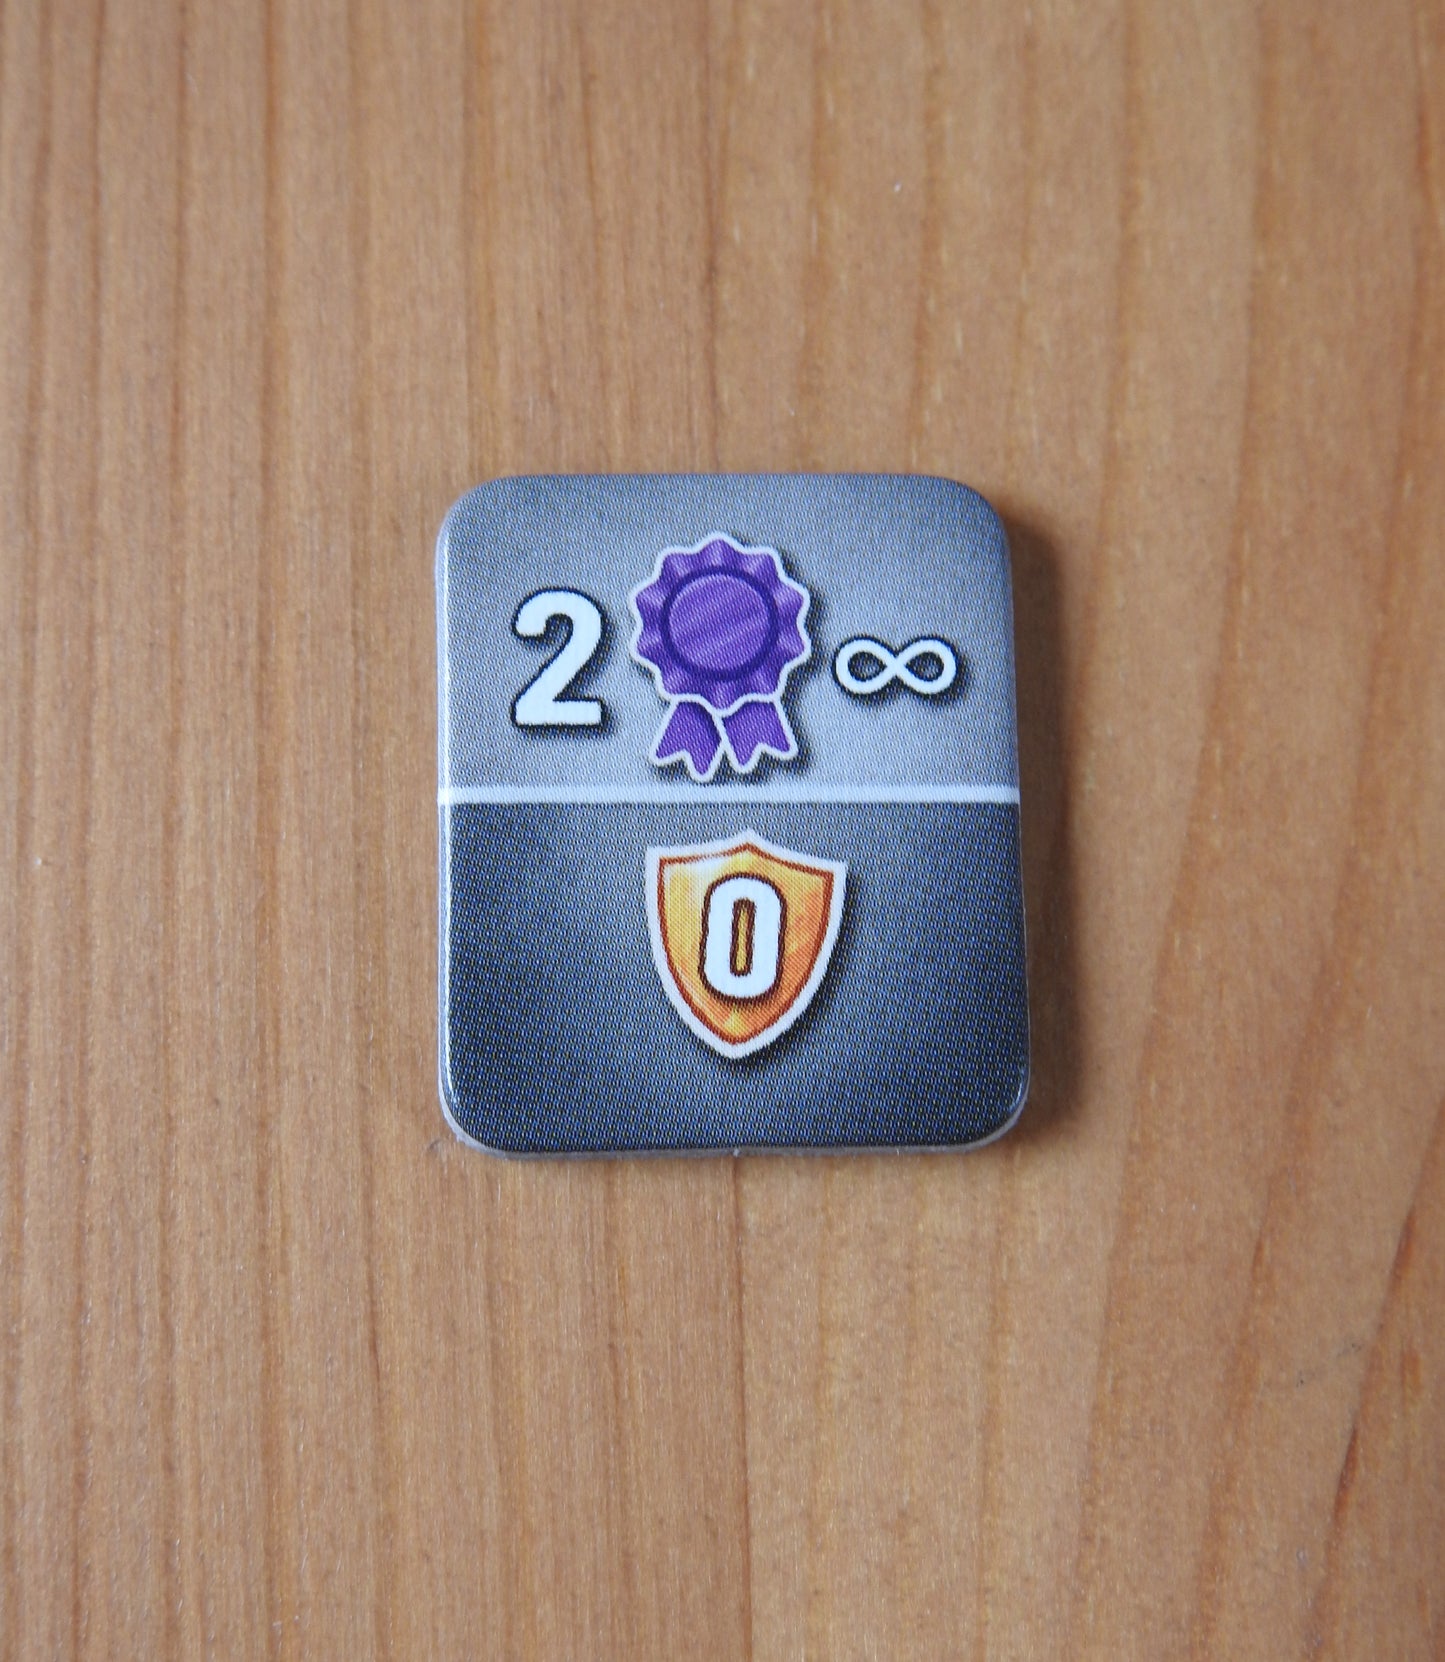 Close-up of 1 of the included tiles, which features a special bonus.